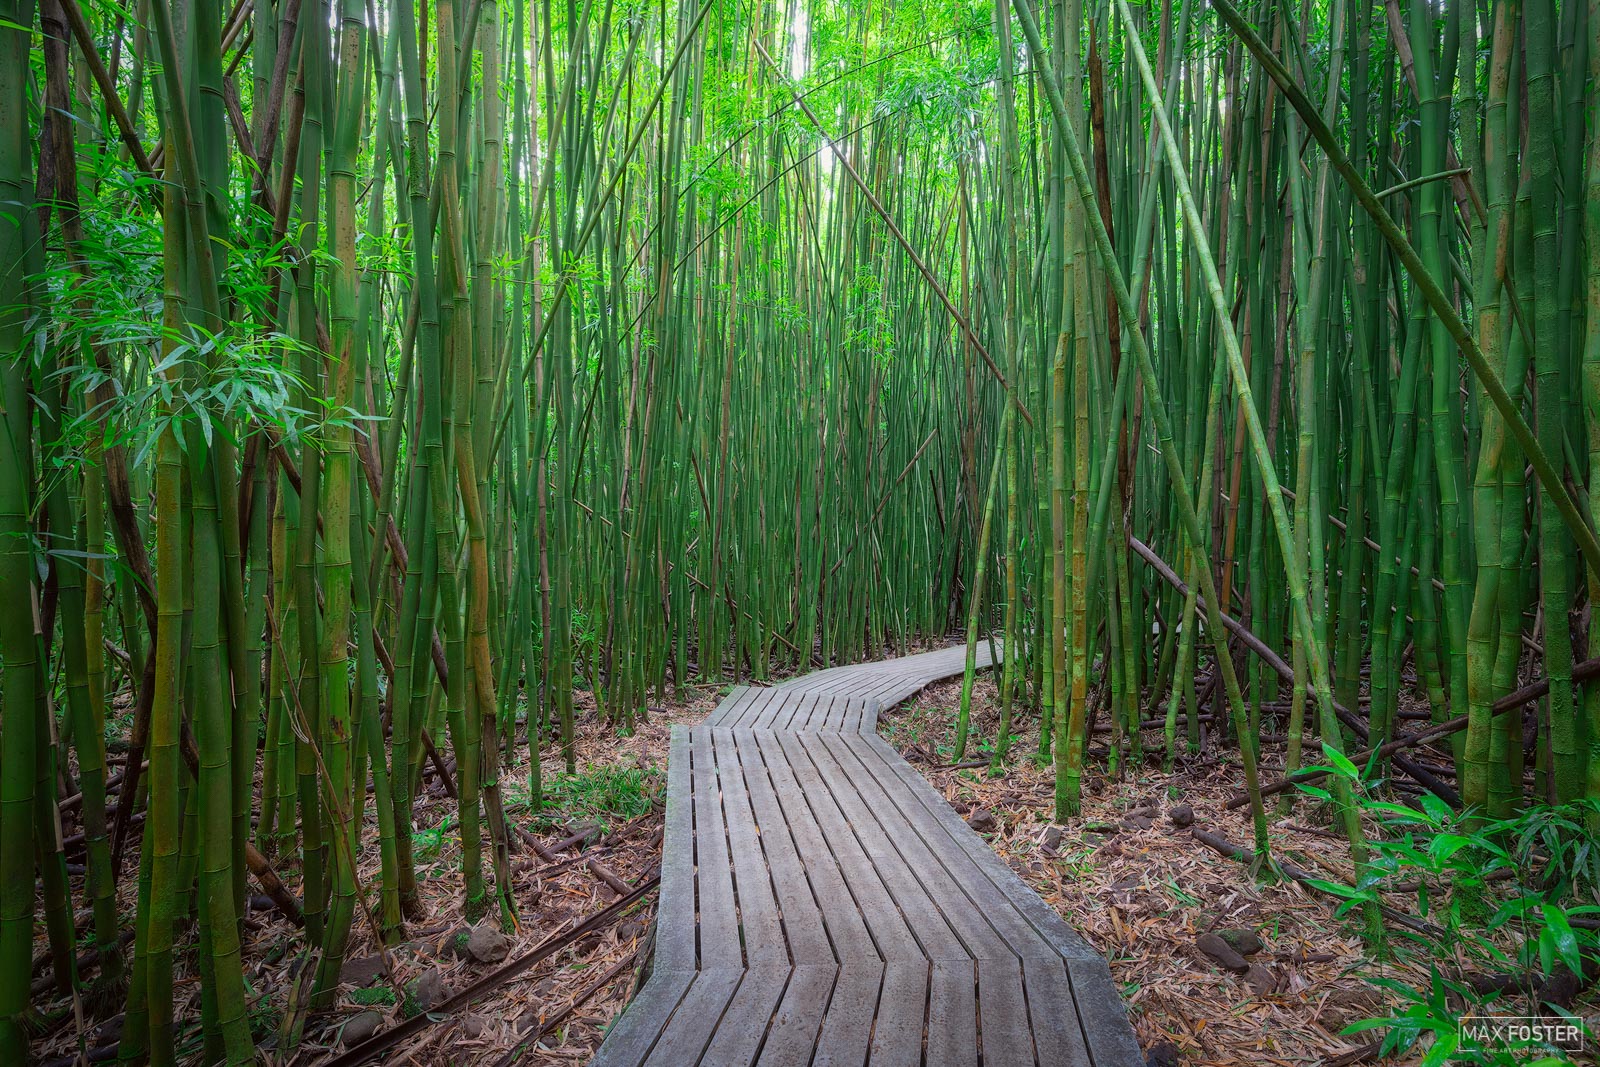 Refresh your space with Shoots and Ladders, Max Foster's limited edition photography print of the Bamboo Forest on Maui from...